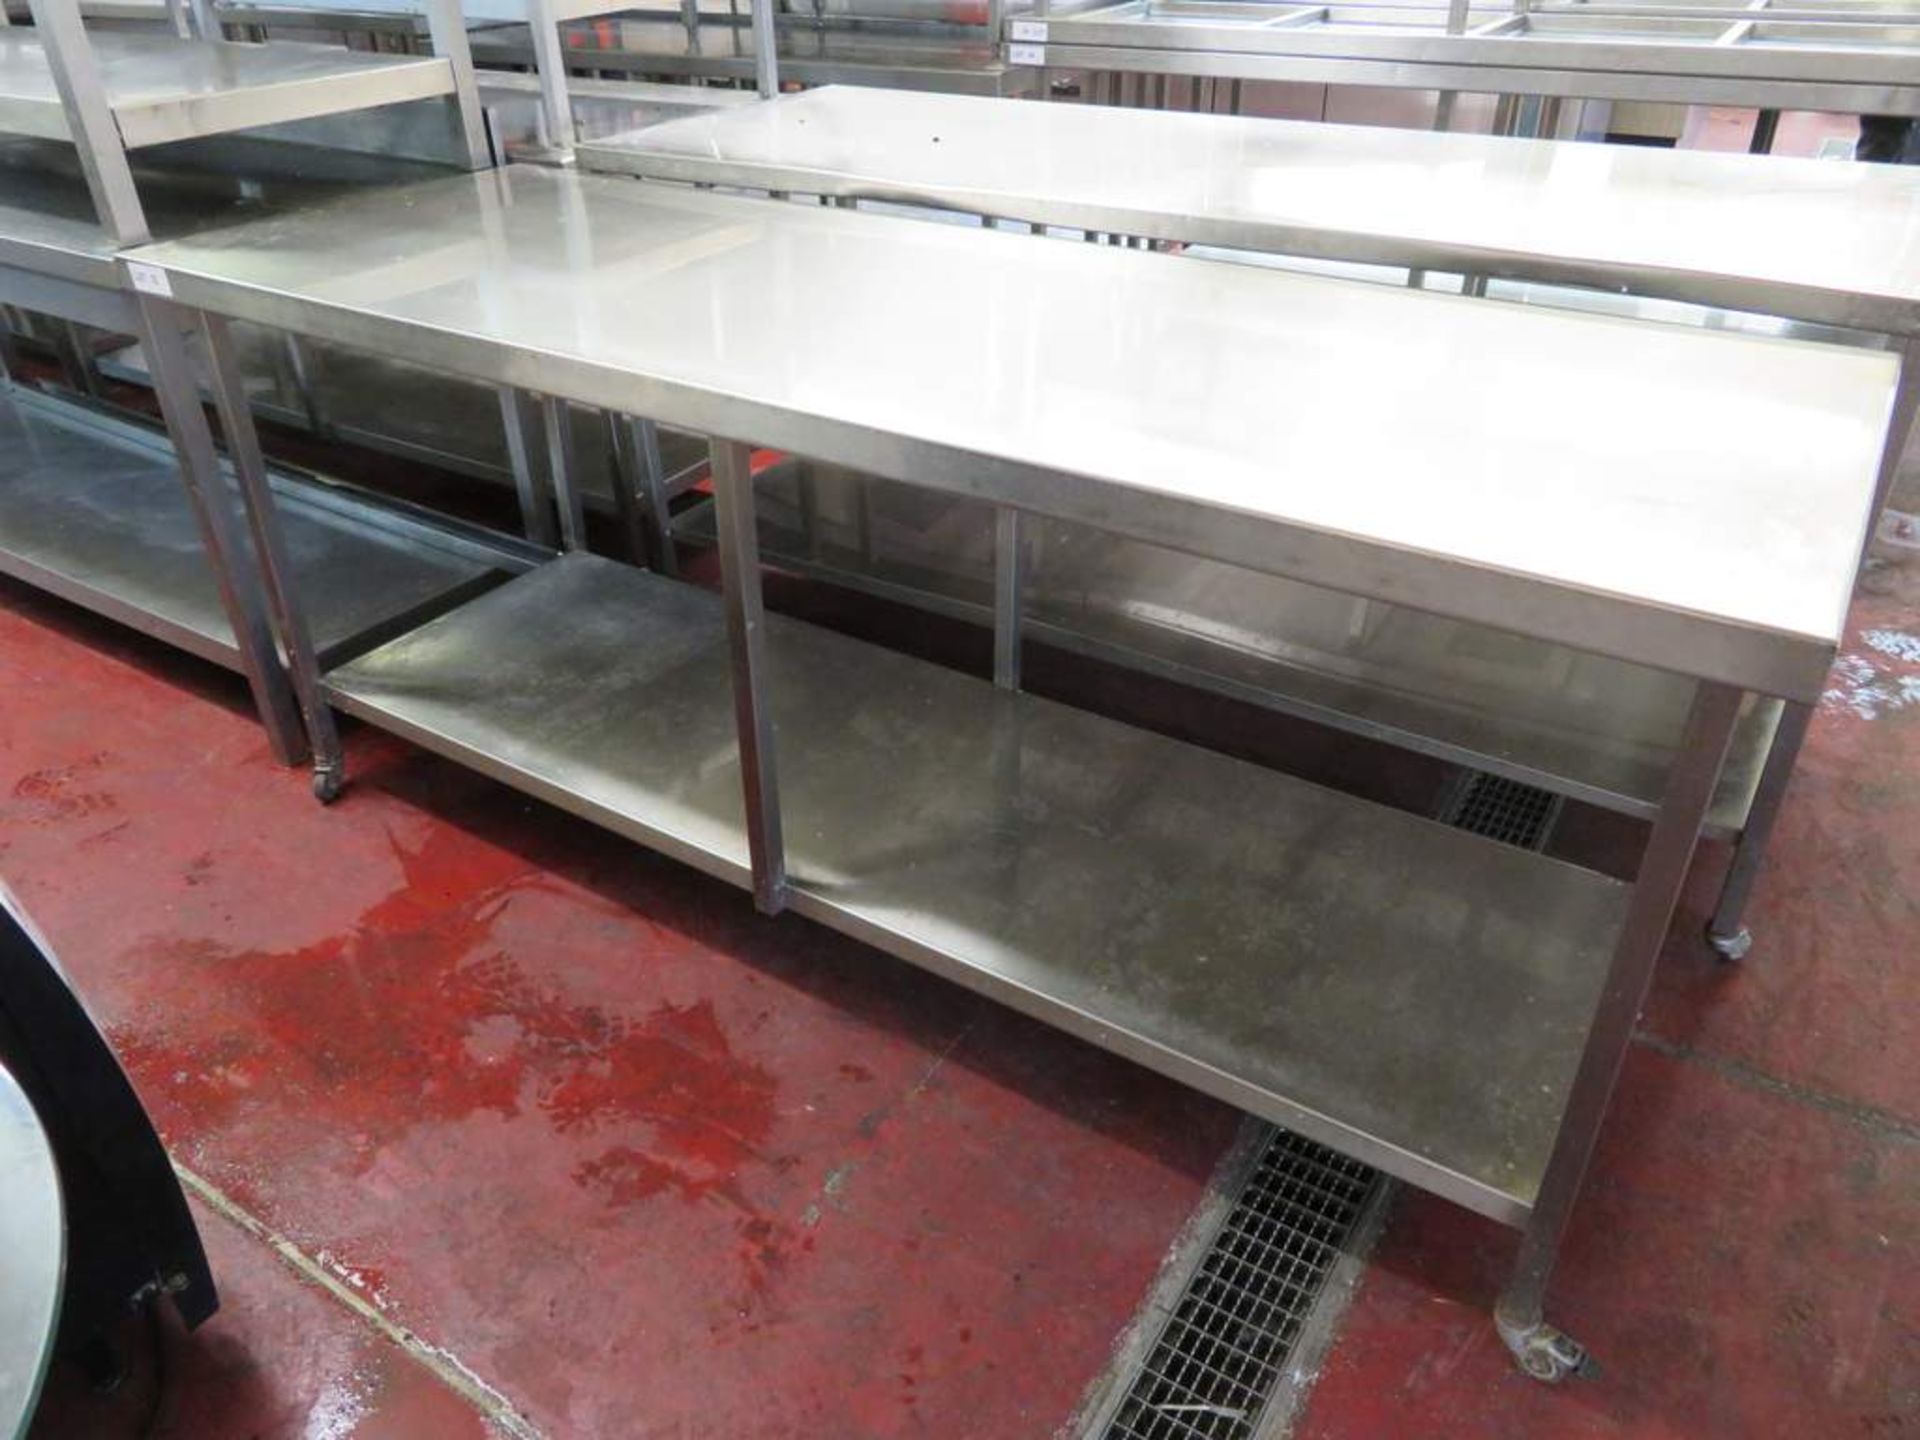 Portable stainless steel preparation unit